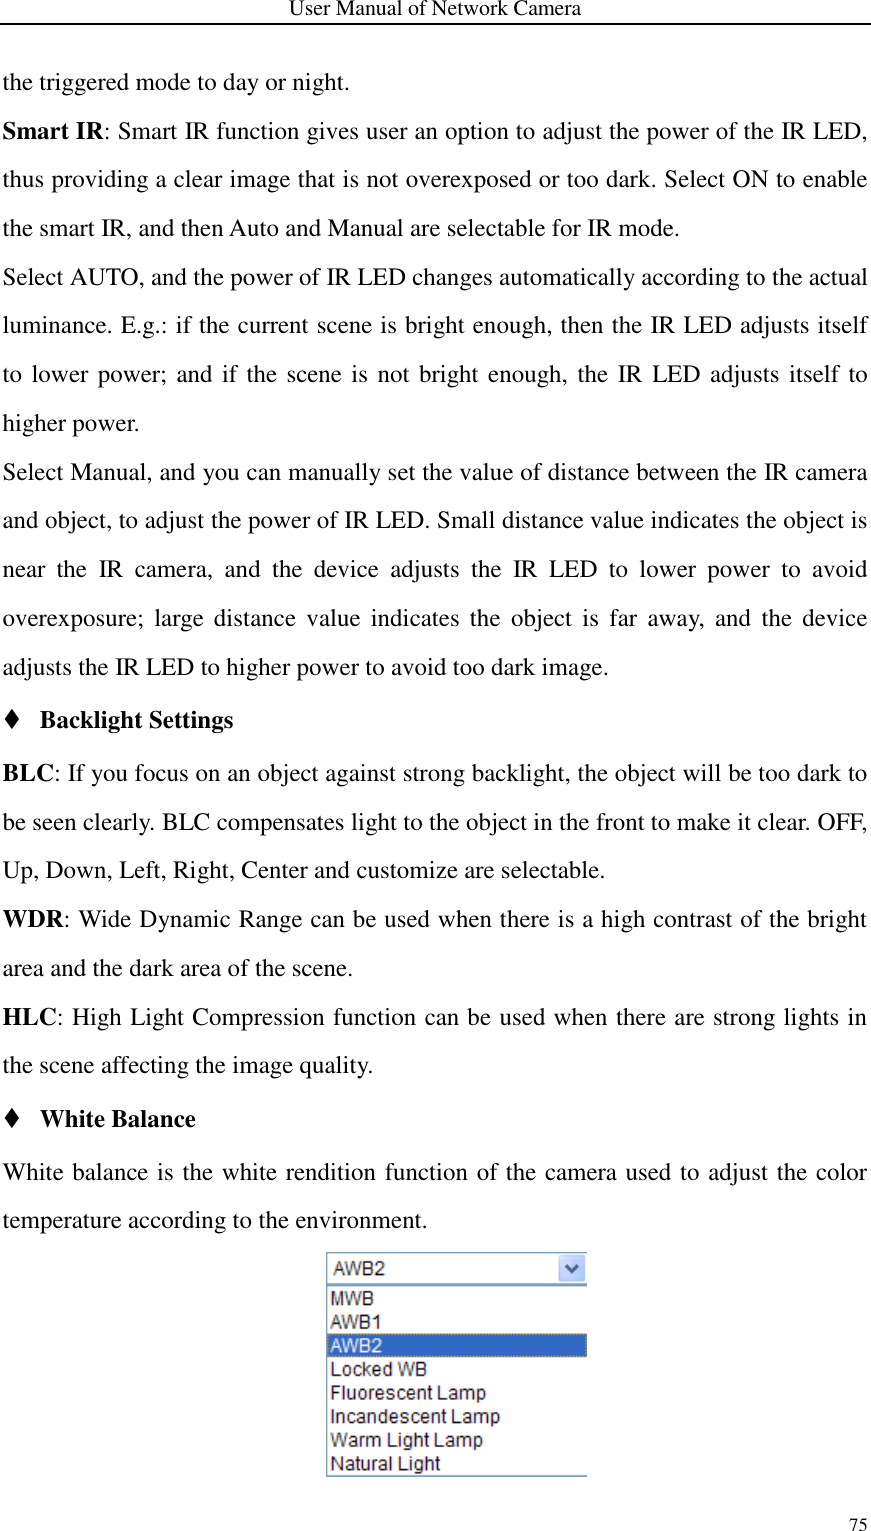 User Manual of Network Camera 75  the triggered mode to day or night. Smart IR: Smart IR function gives user an option to adjust the power of the IR LED, thus providing a clear image that is not overexposed or too dark. Select ON to enable the smart IR, and then Auto and Manual are selectable for IR mode.   Select AUTO, and the power of IR LED changes automatically according to the actual luminance. E.g.: if the current scene is bright enough, then the IR LED adjusts itself to lower power; and if the scene is  not bright enough, the IR LED adjusts itself to higher power.   Select Manual, and you can manually set the value of distance between the IR camera and object, to adjust the power of IR LED. Small distance value indicates the object is near  the  IR  camera,  and  the  device  adjusts  the  IR  LED  to  lower  power  to  avoid overexposure;  large distance  value  indicates  the  object  is  far  away,  and  the  device adjusts the IR LED to higher power to avoid too dark image.  Backlight Settings BLC: If you focus on an object against strong backlight, the object will be too dark to be seen clearly. BLC compensates light to the object in the front to make it clear. OFF, Up, Down, Left, Right, Center and customize are selectable. WDR: Wide Dynamic Range can be used when there is a high contrast of the bright area and the dark area of the scene. HLC: High Light Compression function can be used when there are strong lights in the scene affecting the image quality.  White Balance White balance is the white rendition function of the camera used to adjust the color temperature according to the environment.    